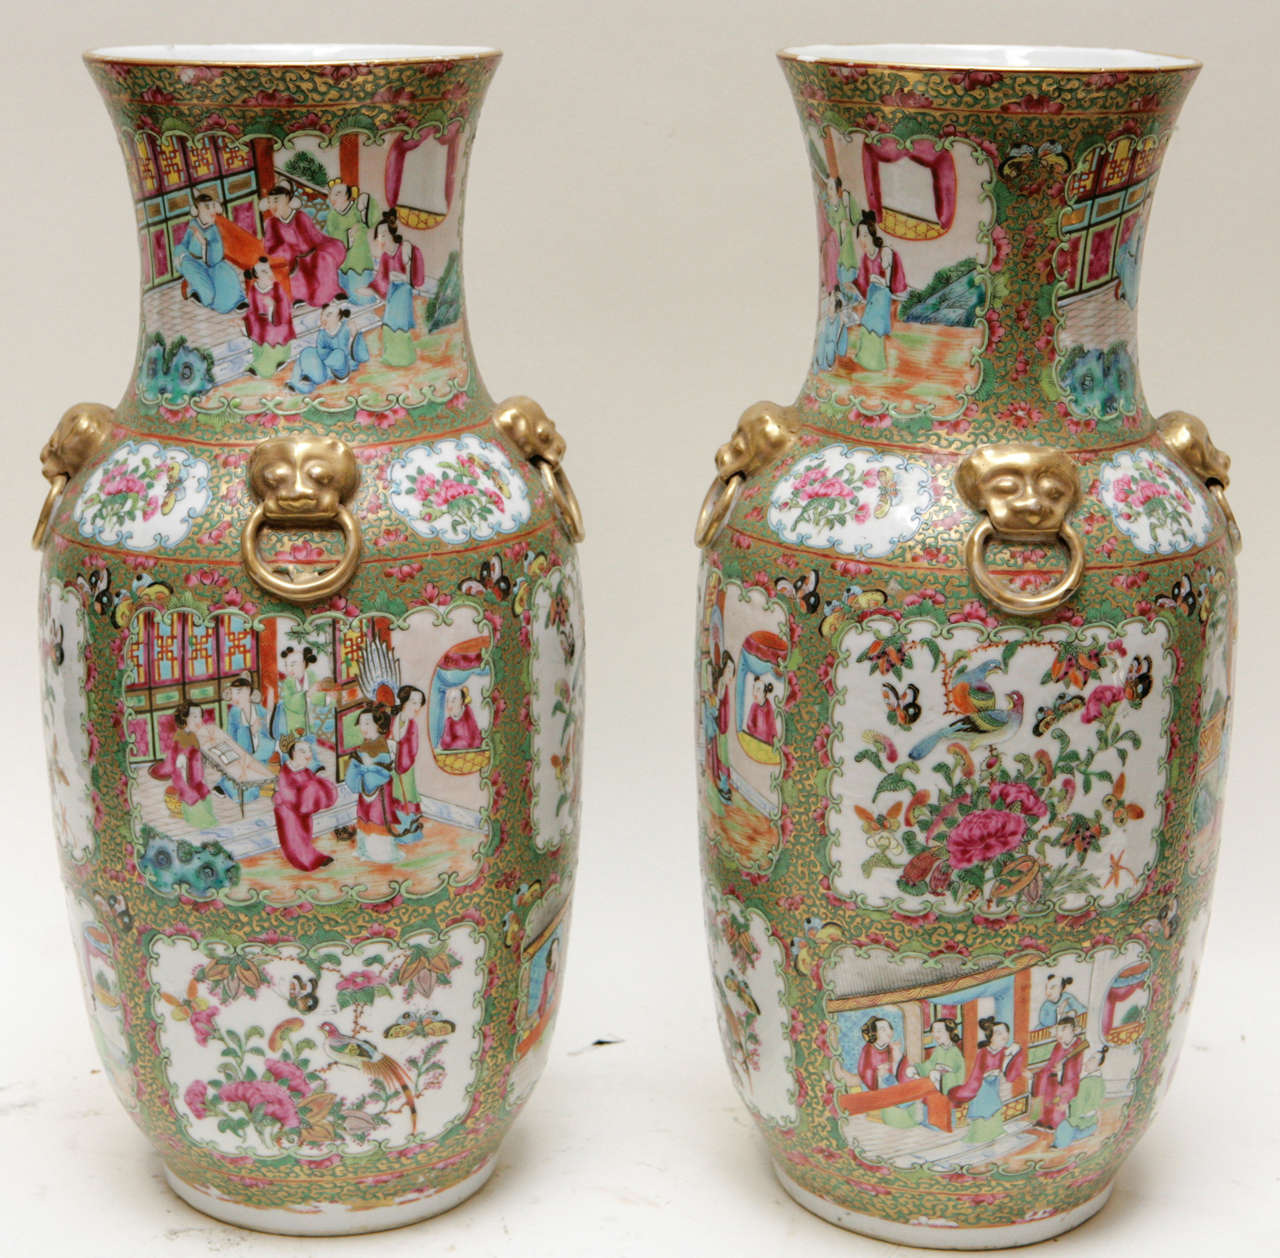 Pair of 19th c.Chinese Rose Medallion Vases with Foo Dog and Ring Motif.